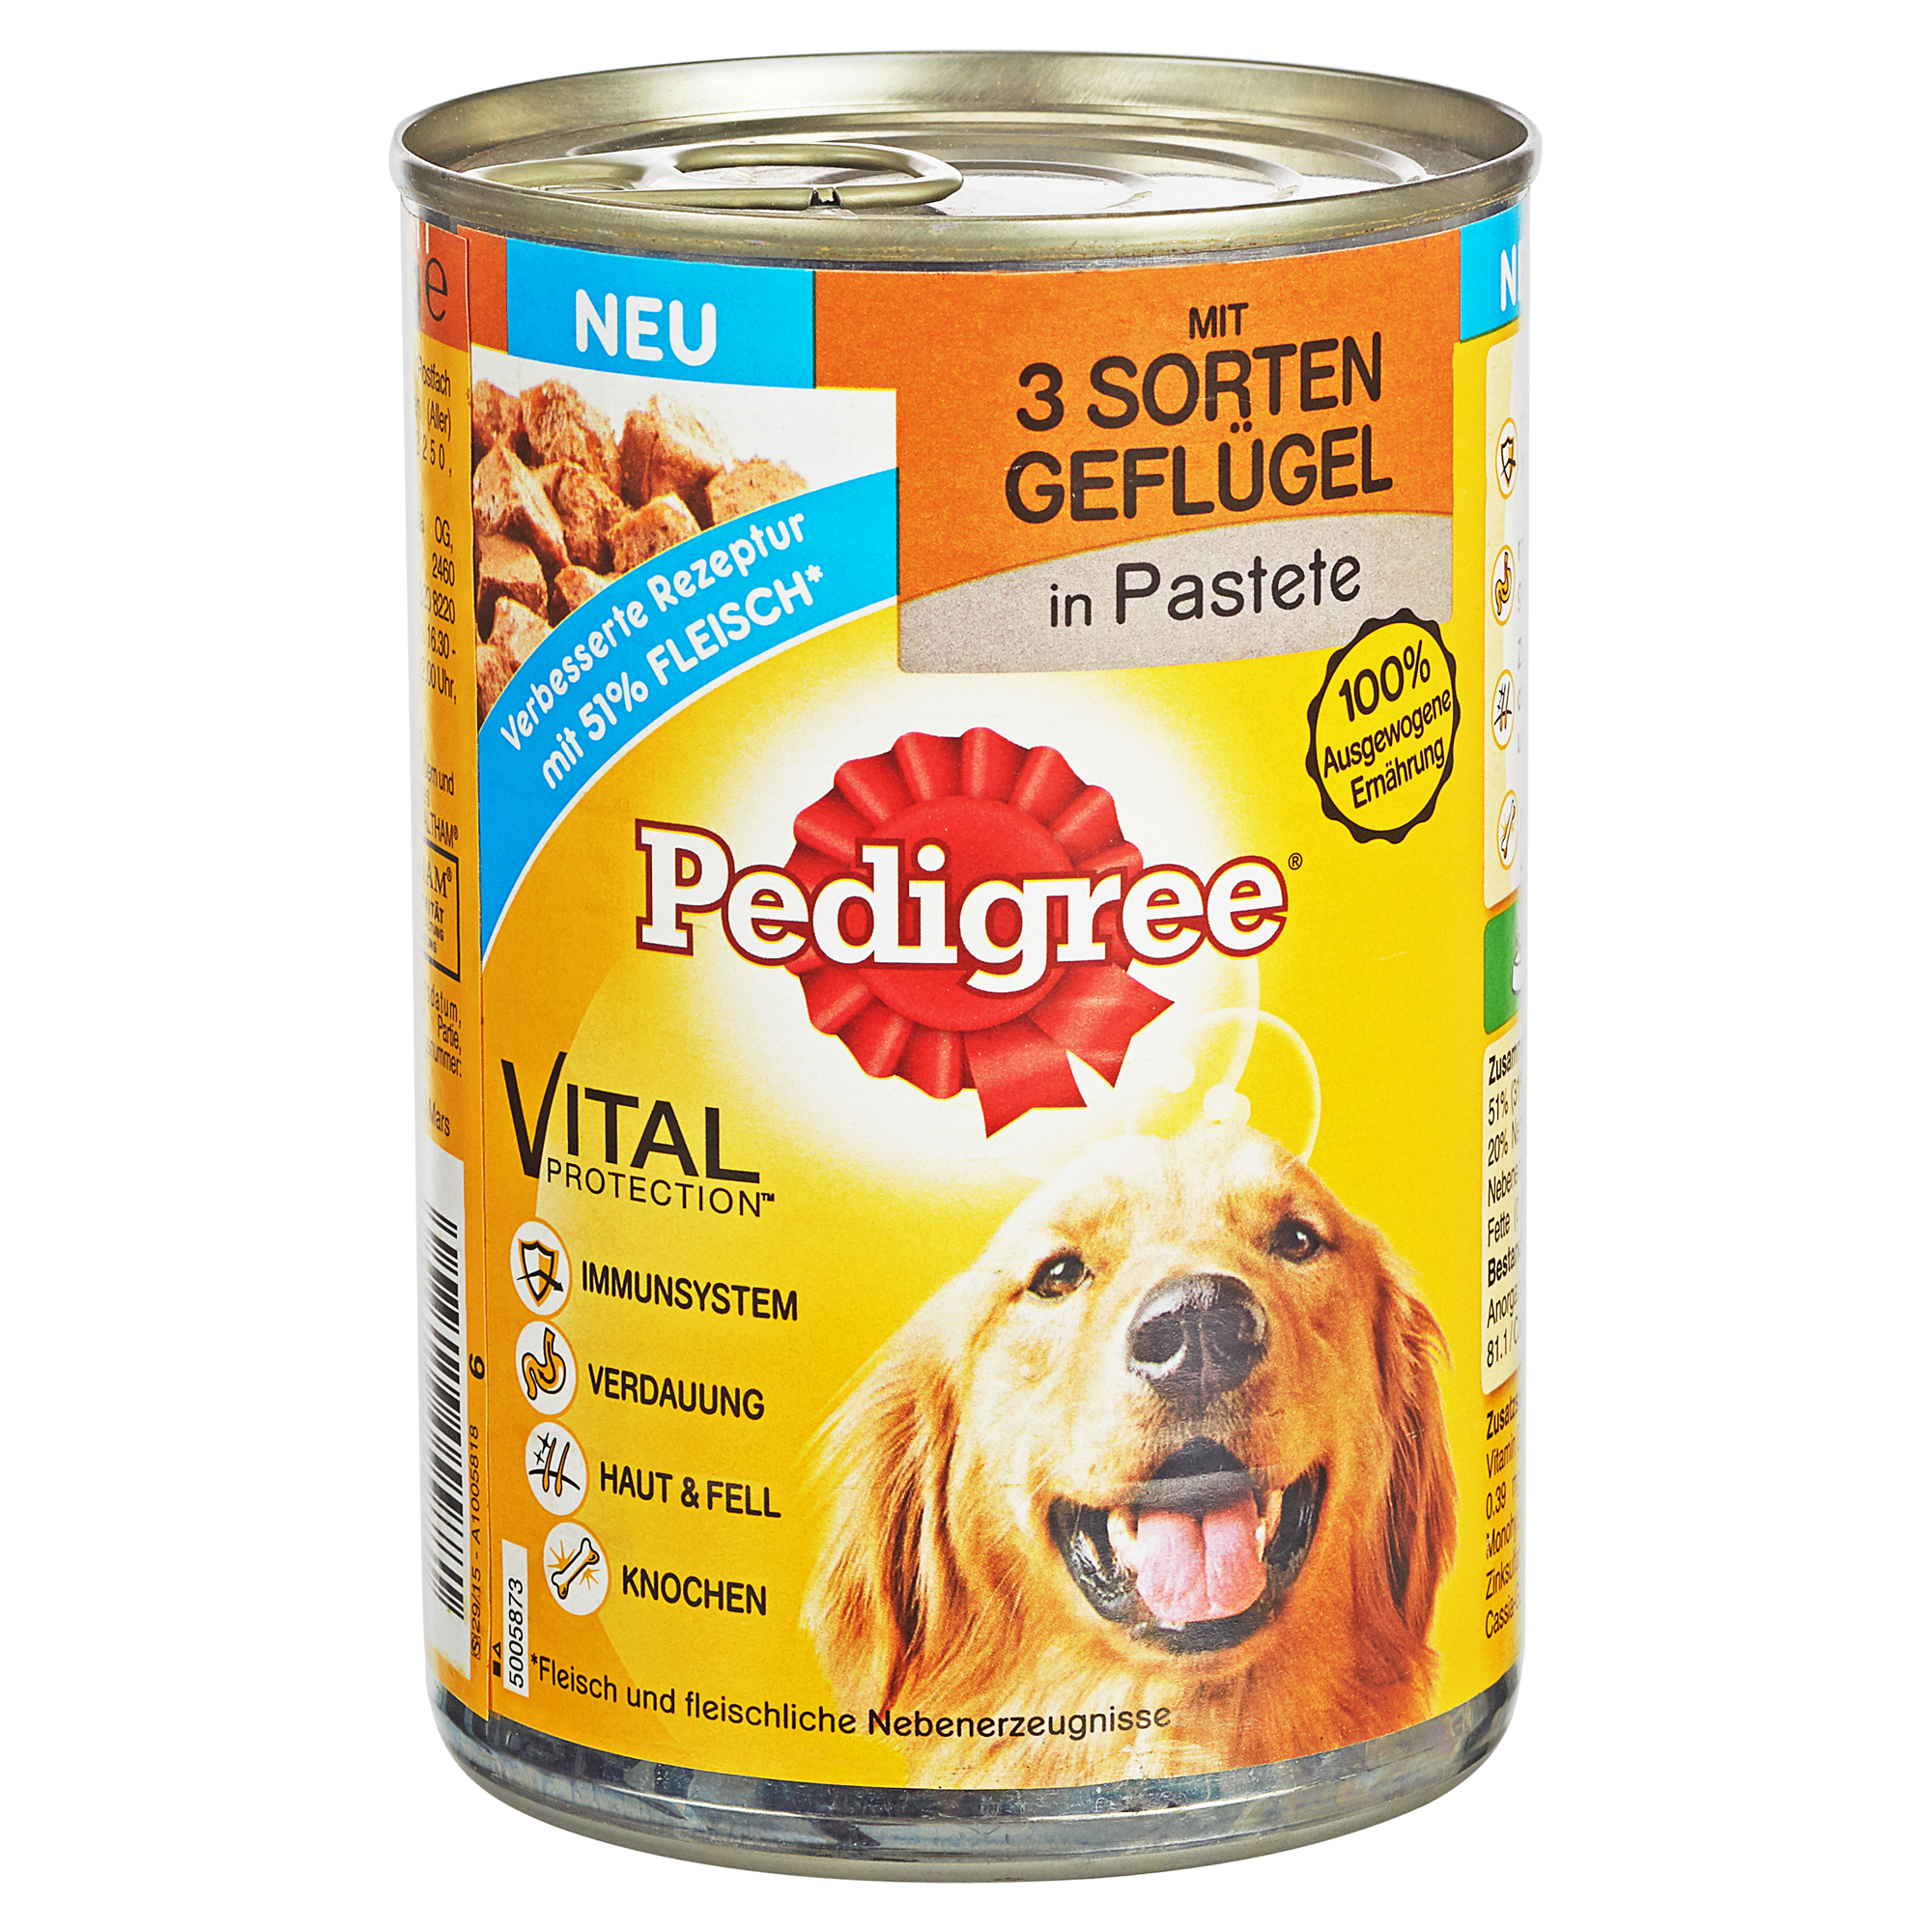 Hundenassfutter "Adult" Geflügel in Pastete 400 g + product picture